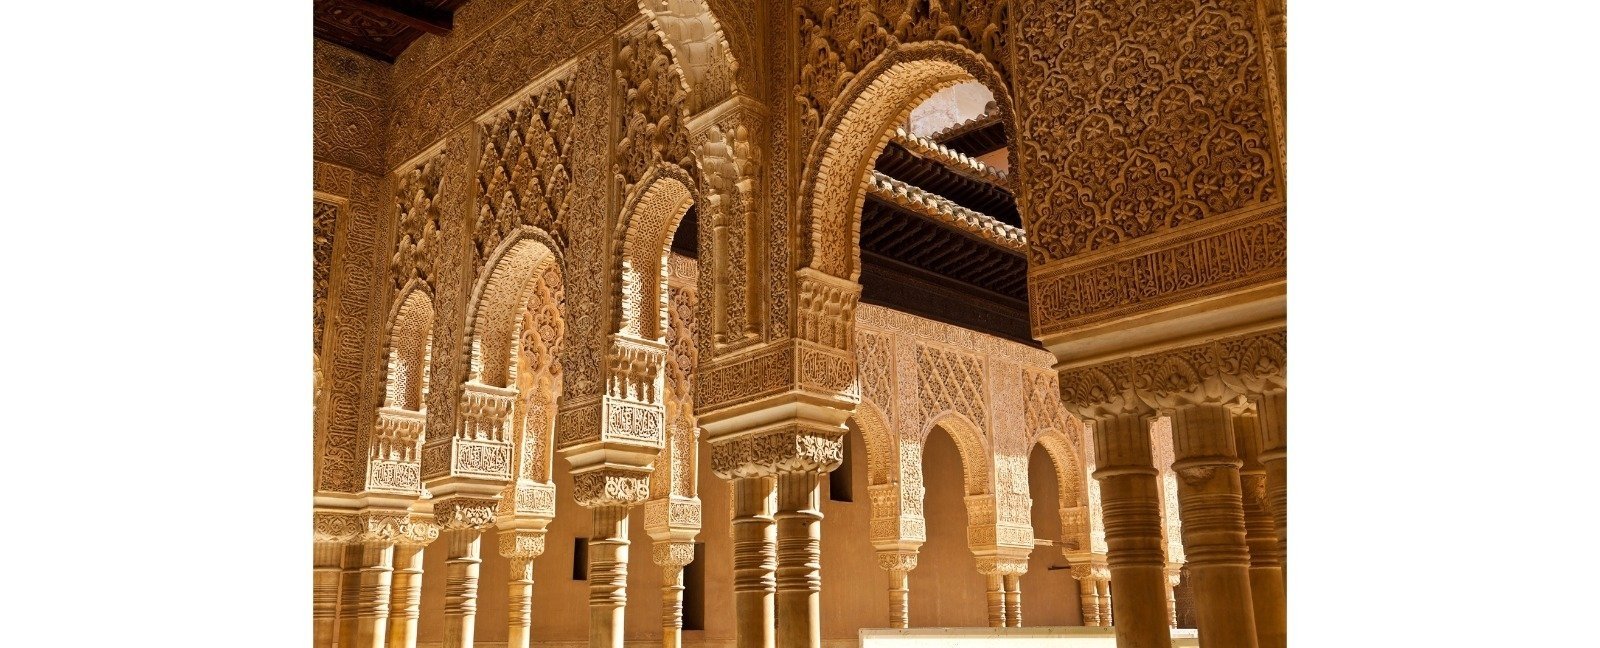 Moorish arches in the Court of the Lions at the Alhambra in Granada, southern Spain. (Shutterstock Photo)
